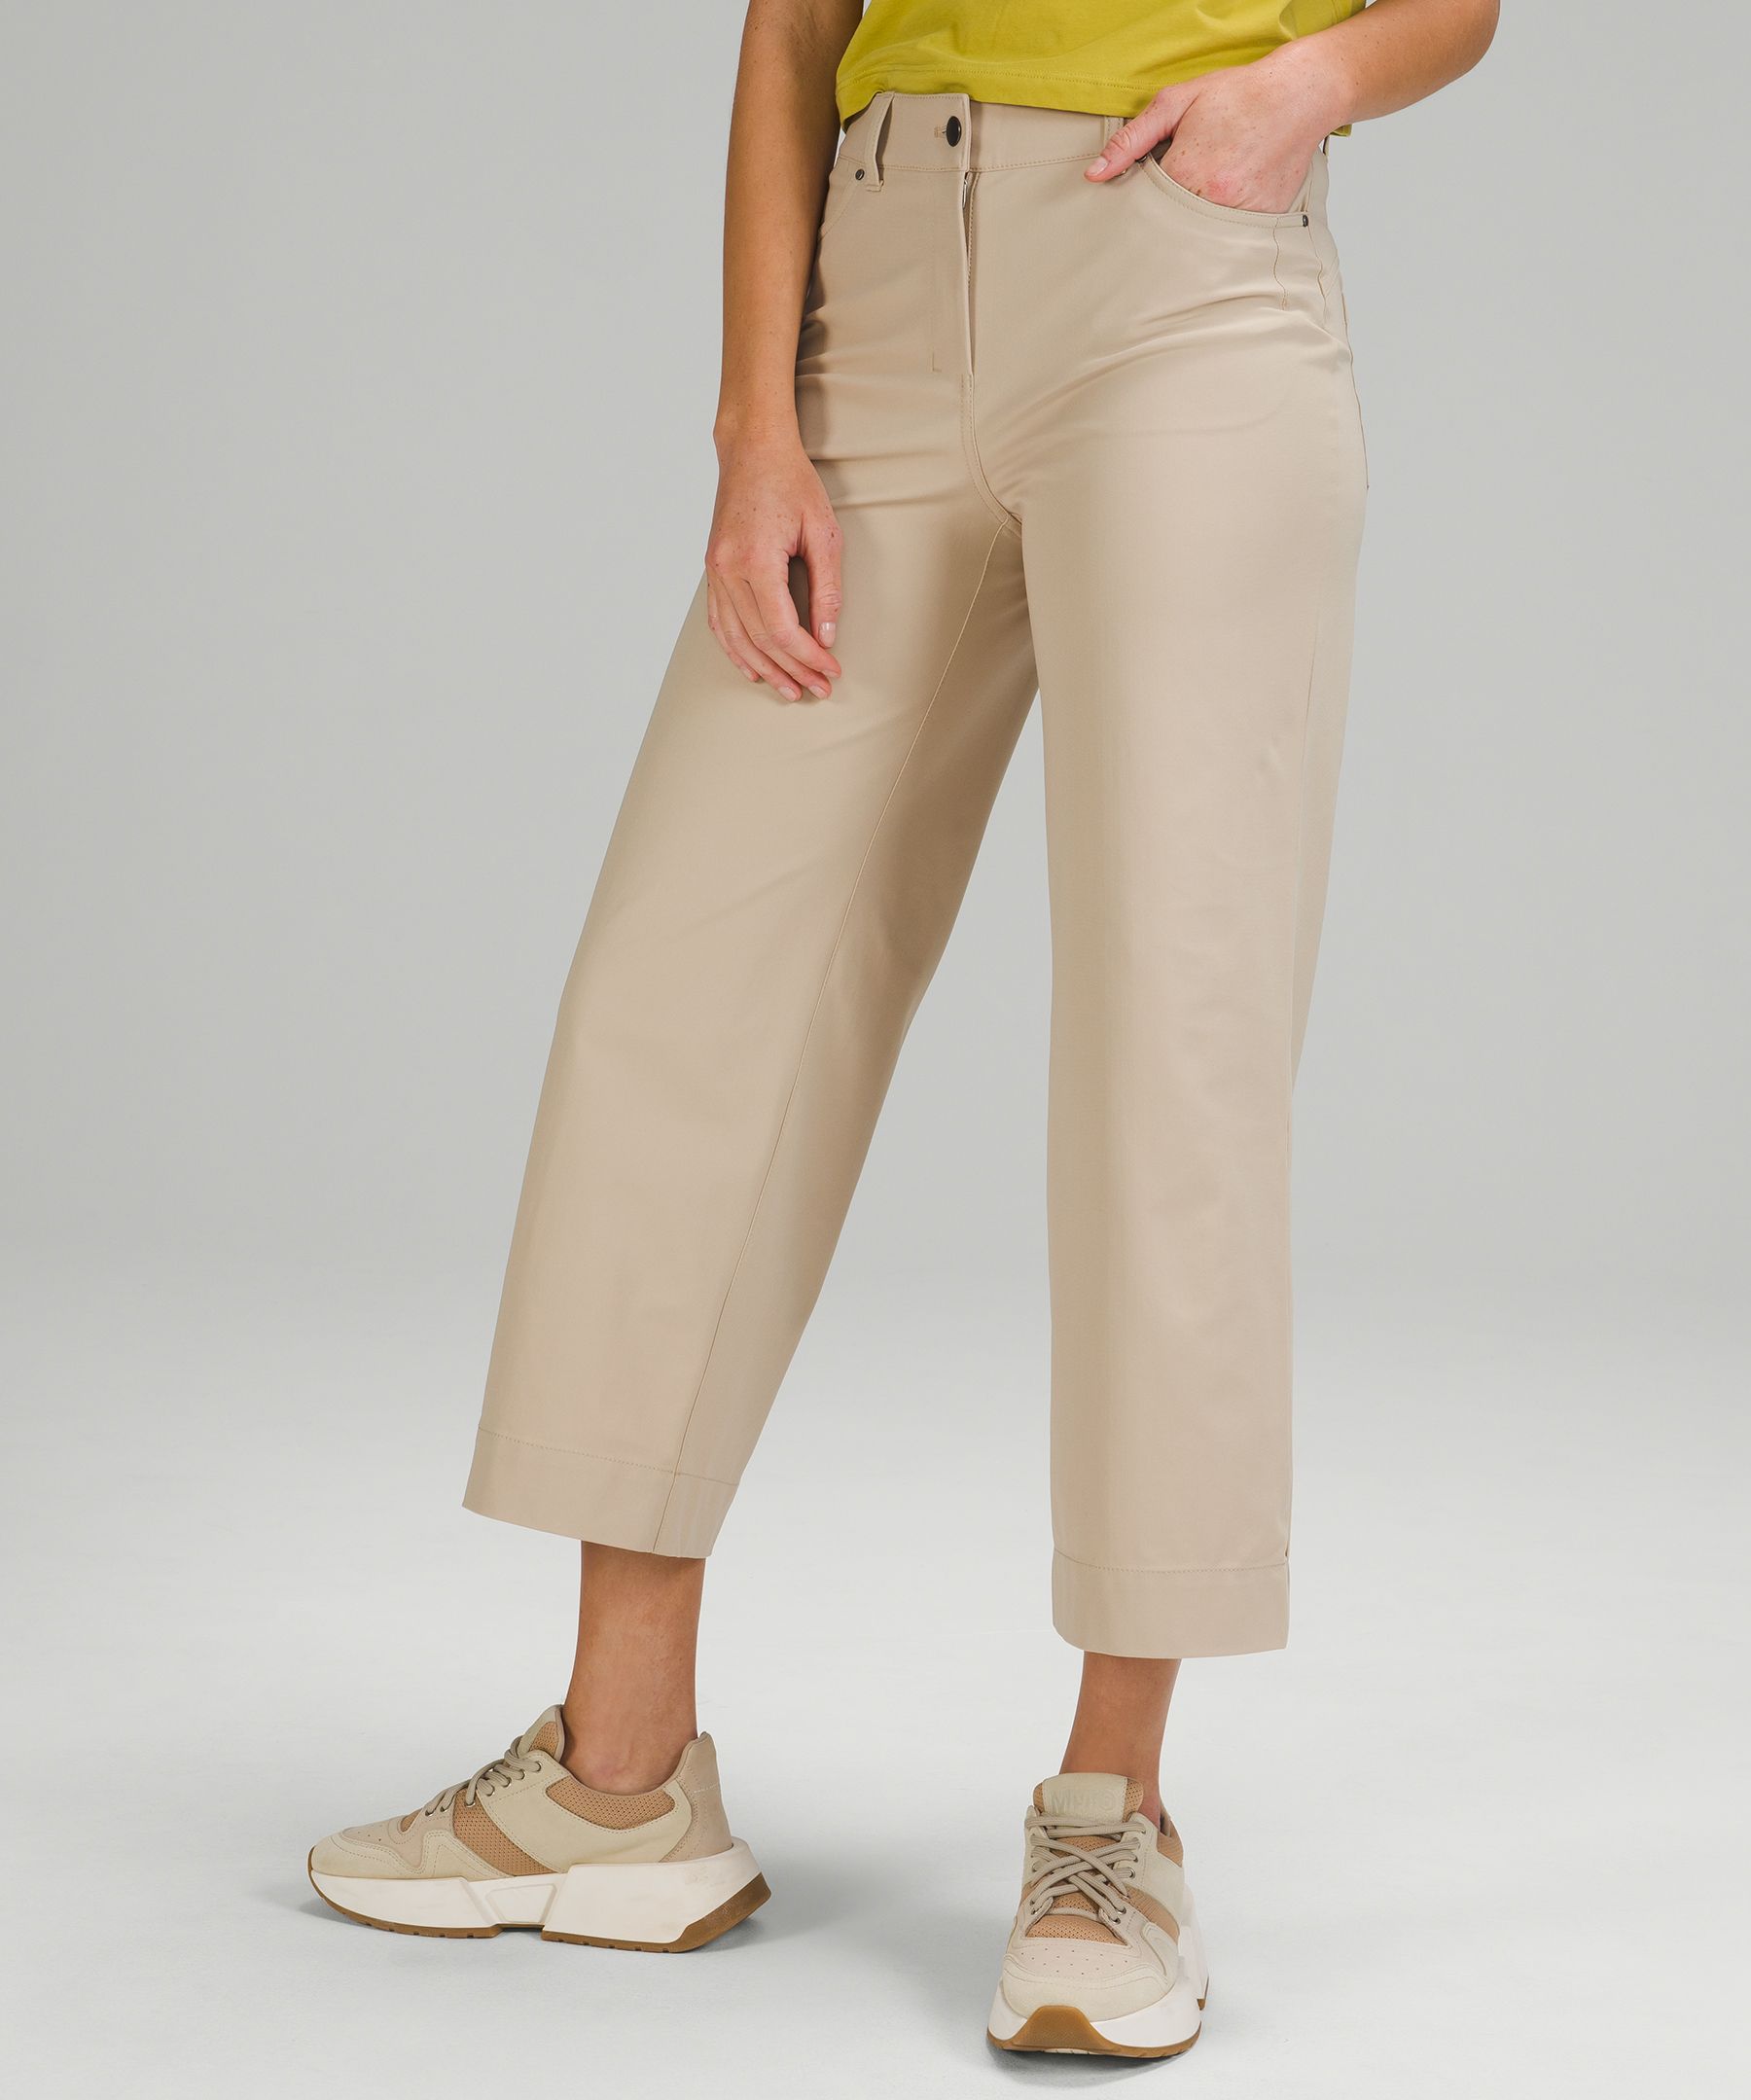 Opinions on fit of these city sleek pants : r/lululemon